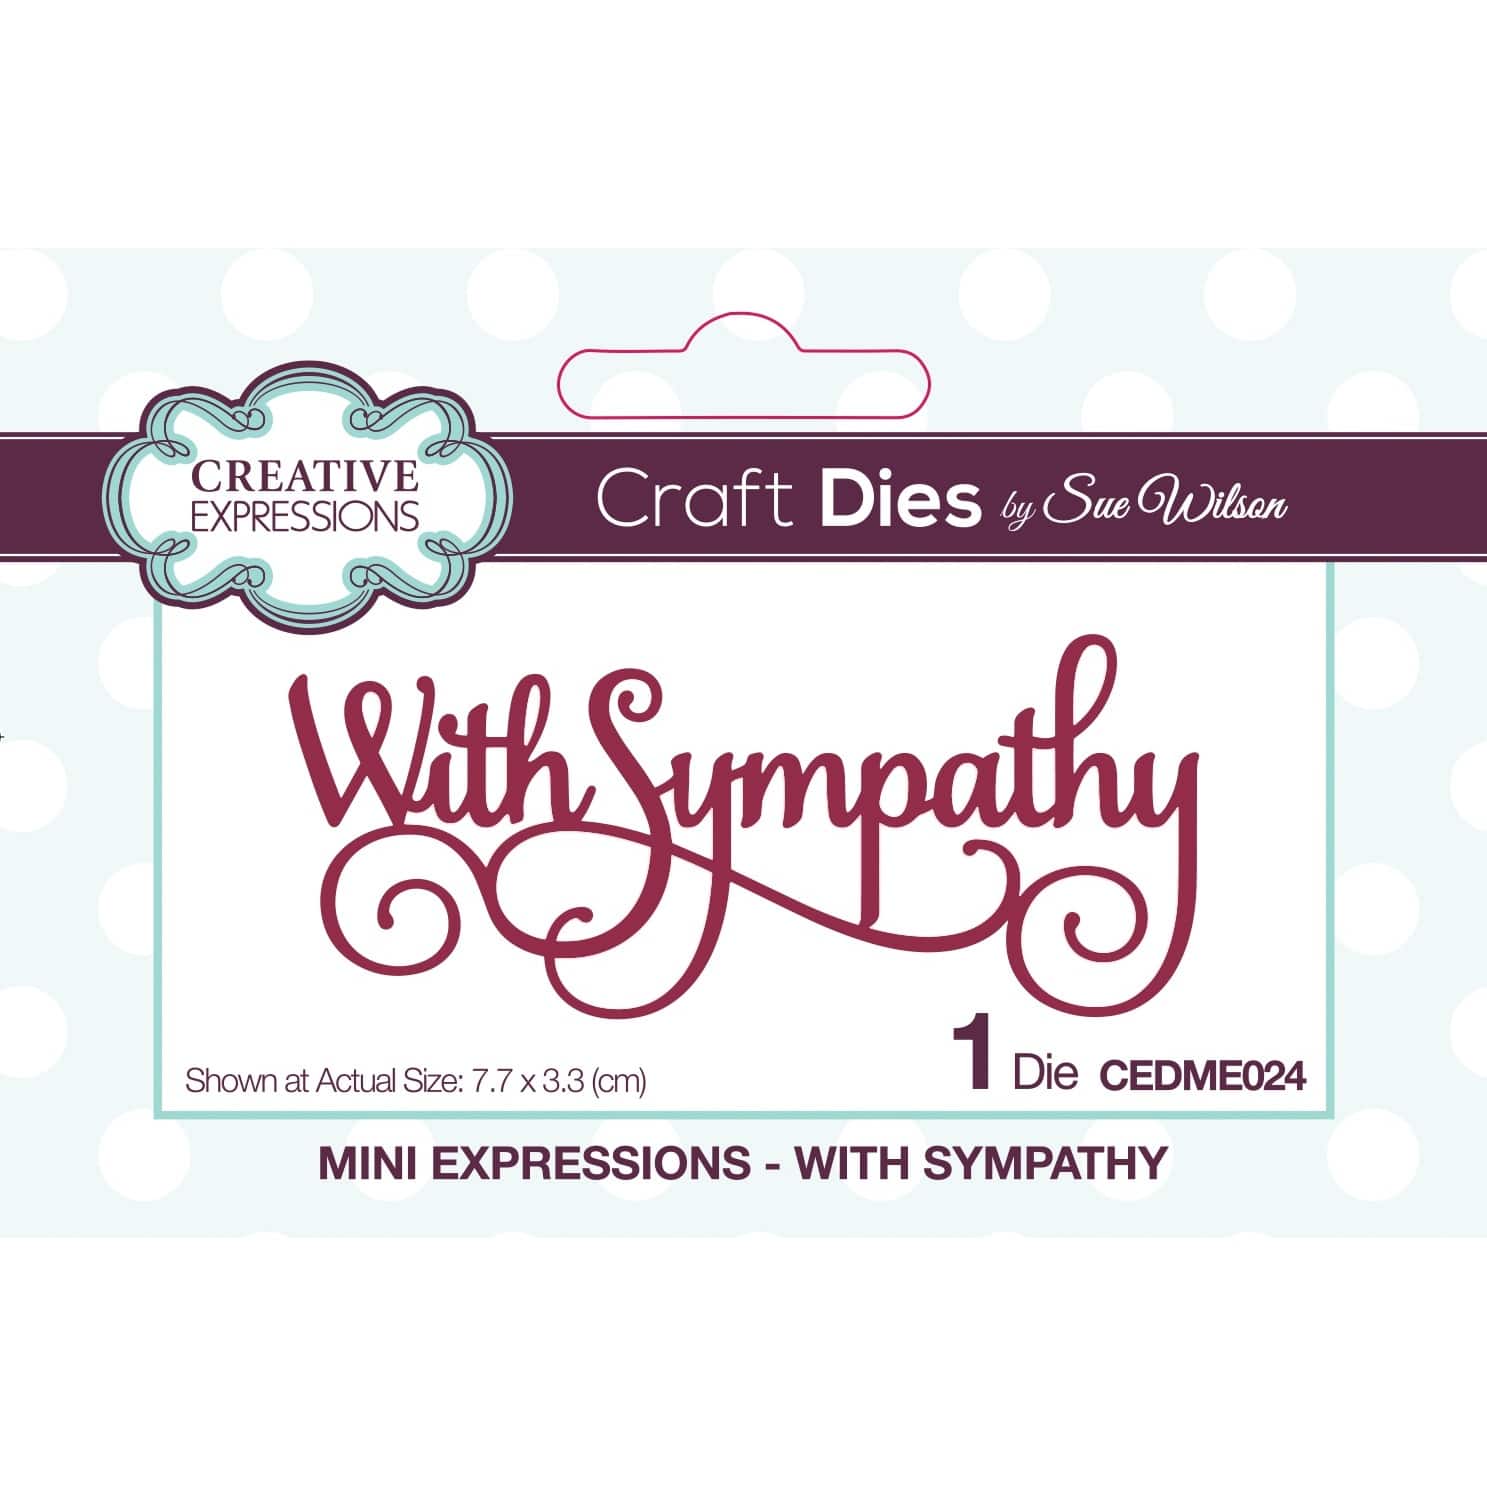 Creative Expressions Mini Expressions With Sympathy Craft Die